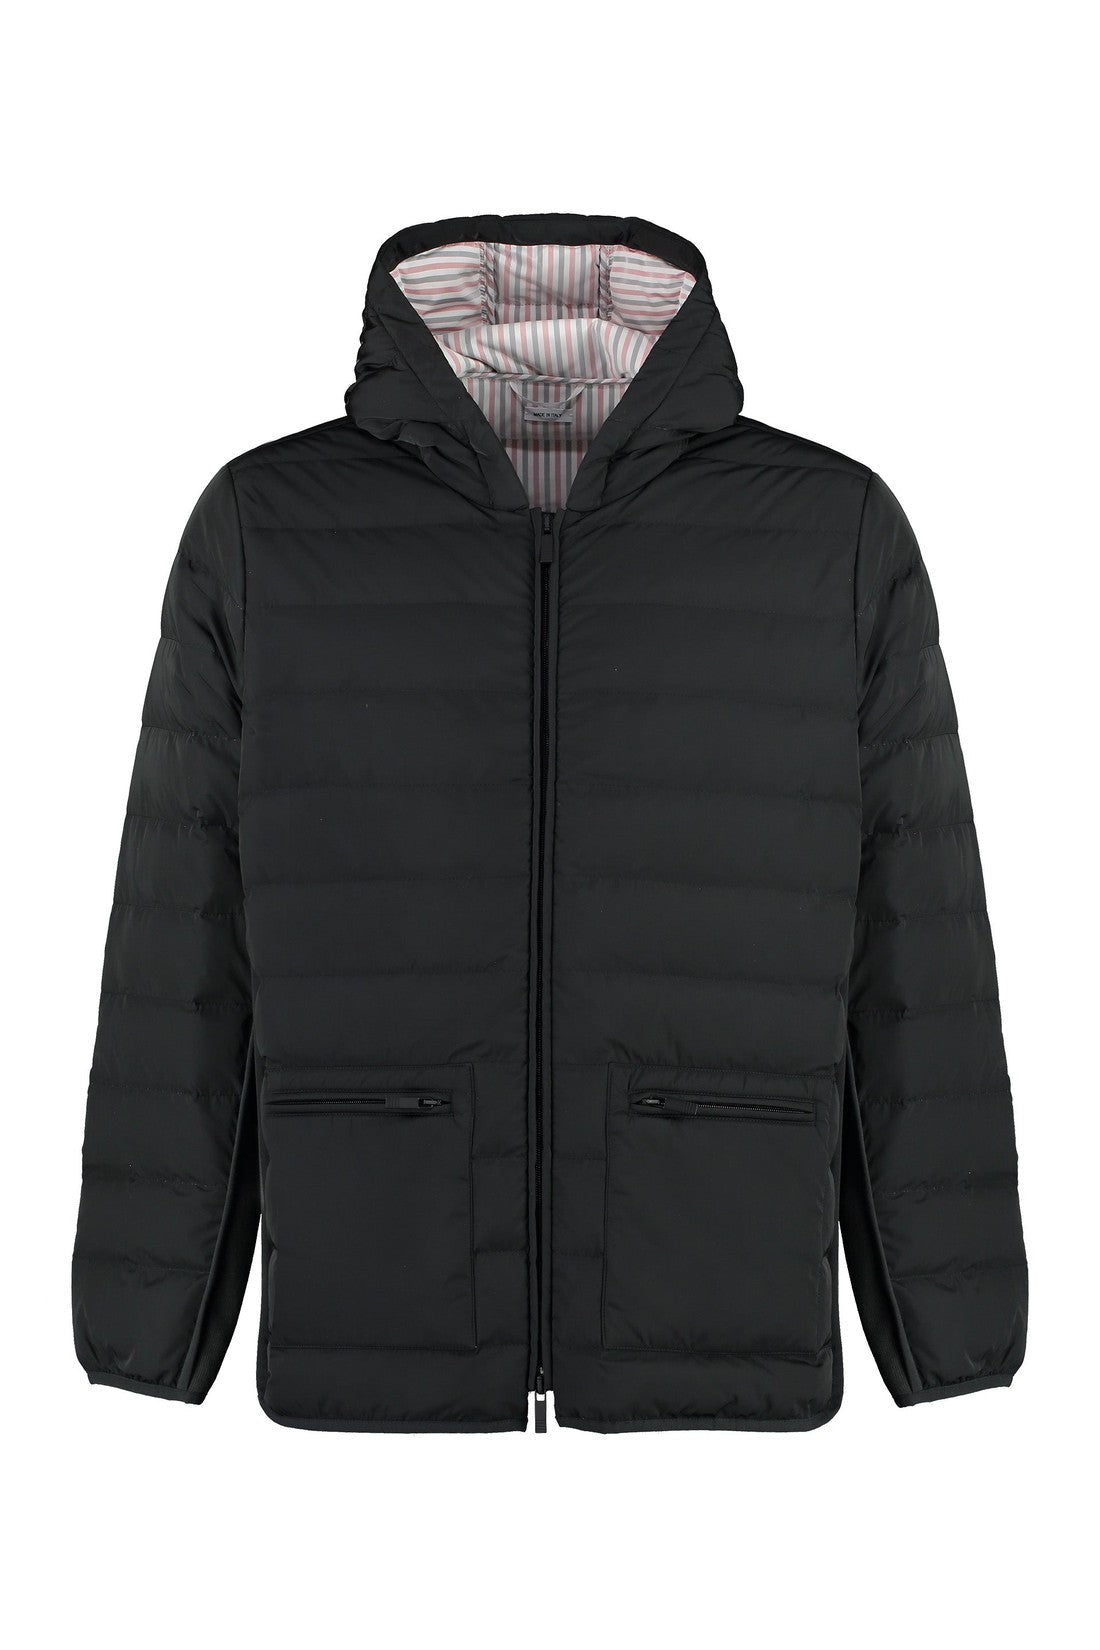 Thom Browne-OUTLET-SALE-Hooded down jacket-ARCHIVIST